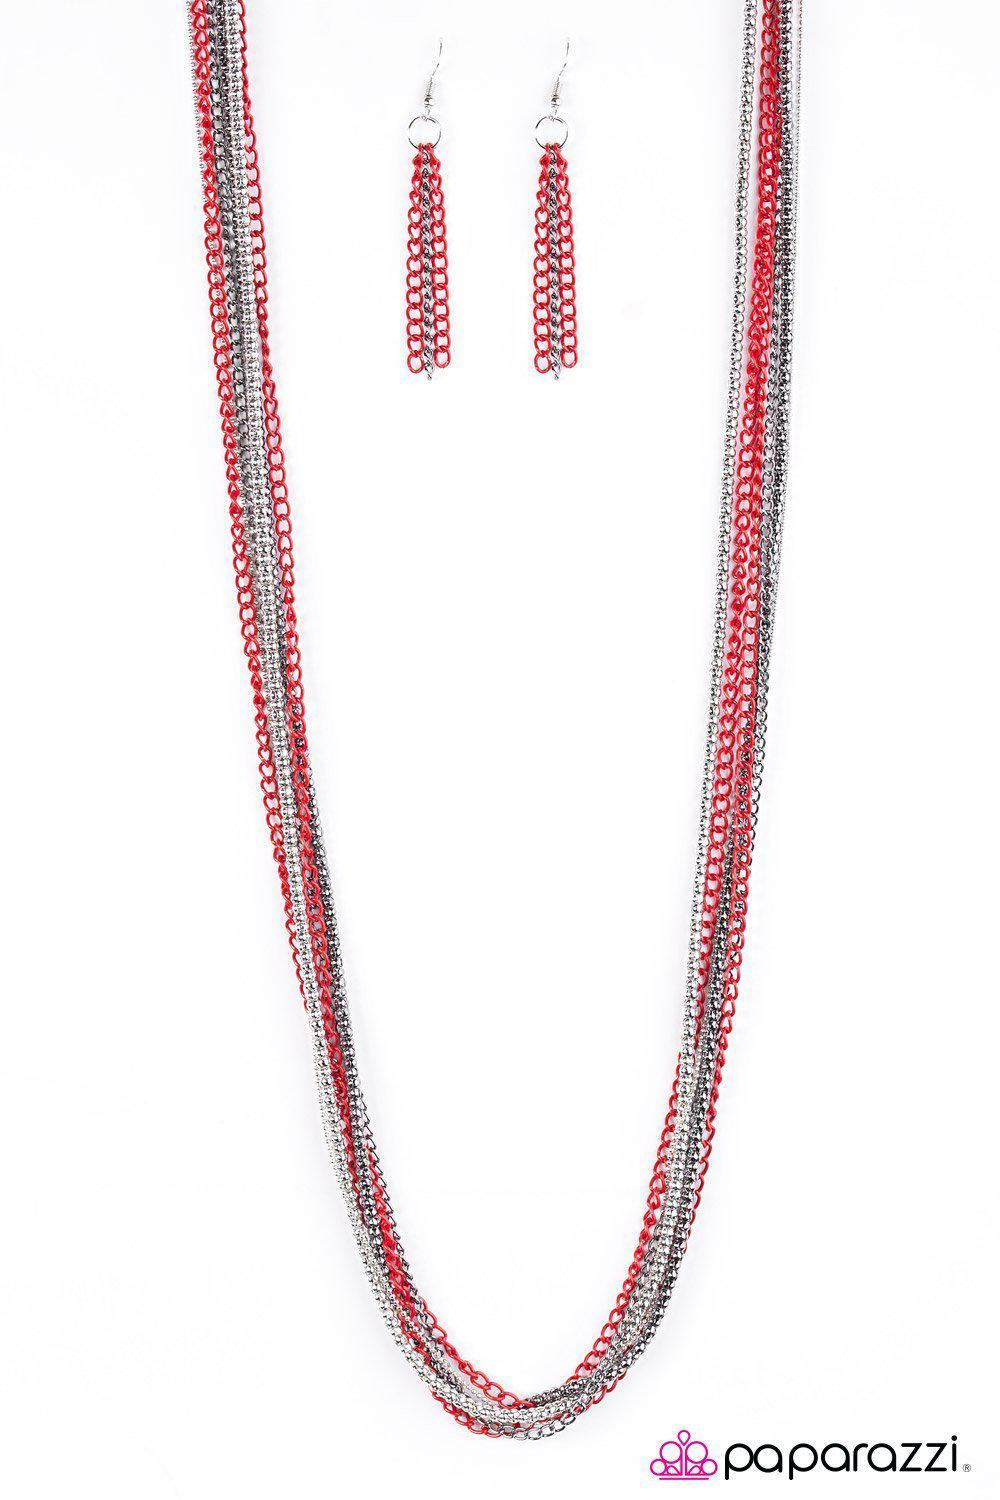 Colorful Calamity Red, Gunmetal and Silver Necklace - Paparazzi Accessories-CarasShop.com - $5 Jewelry by Cara Jewels